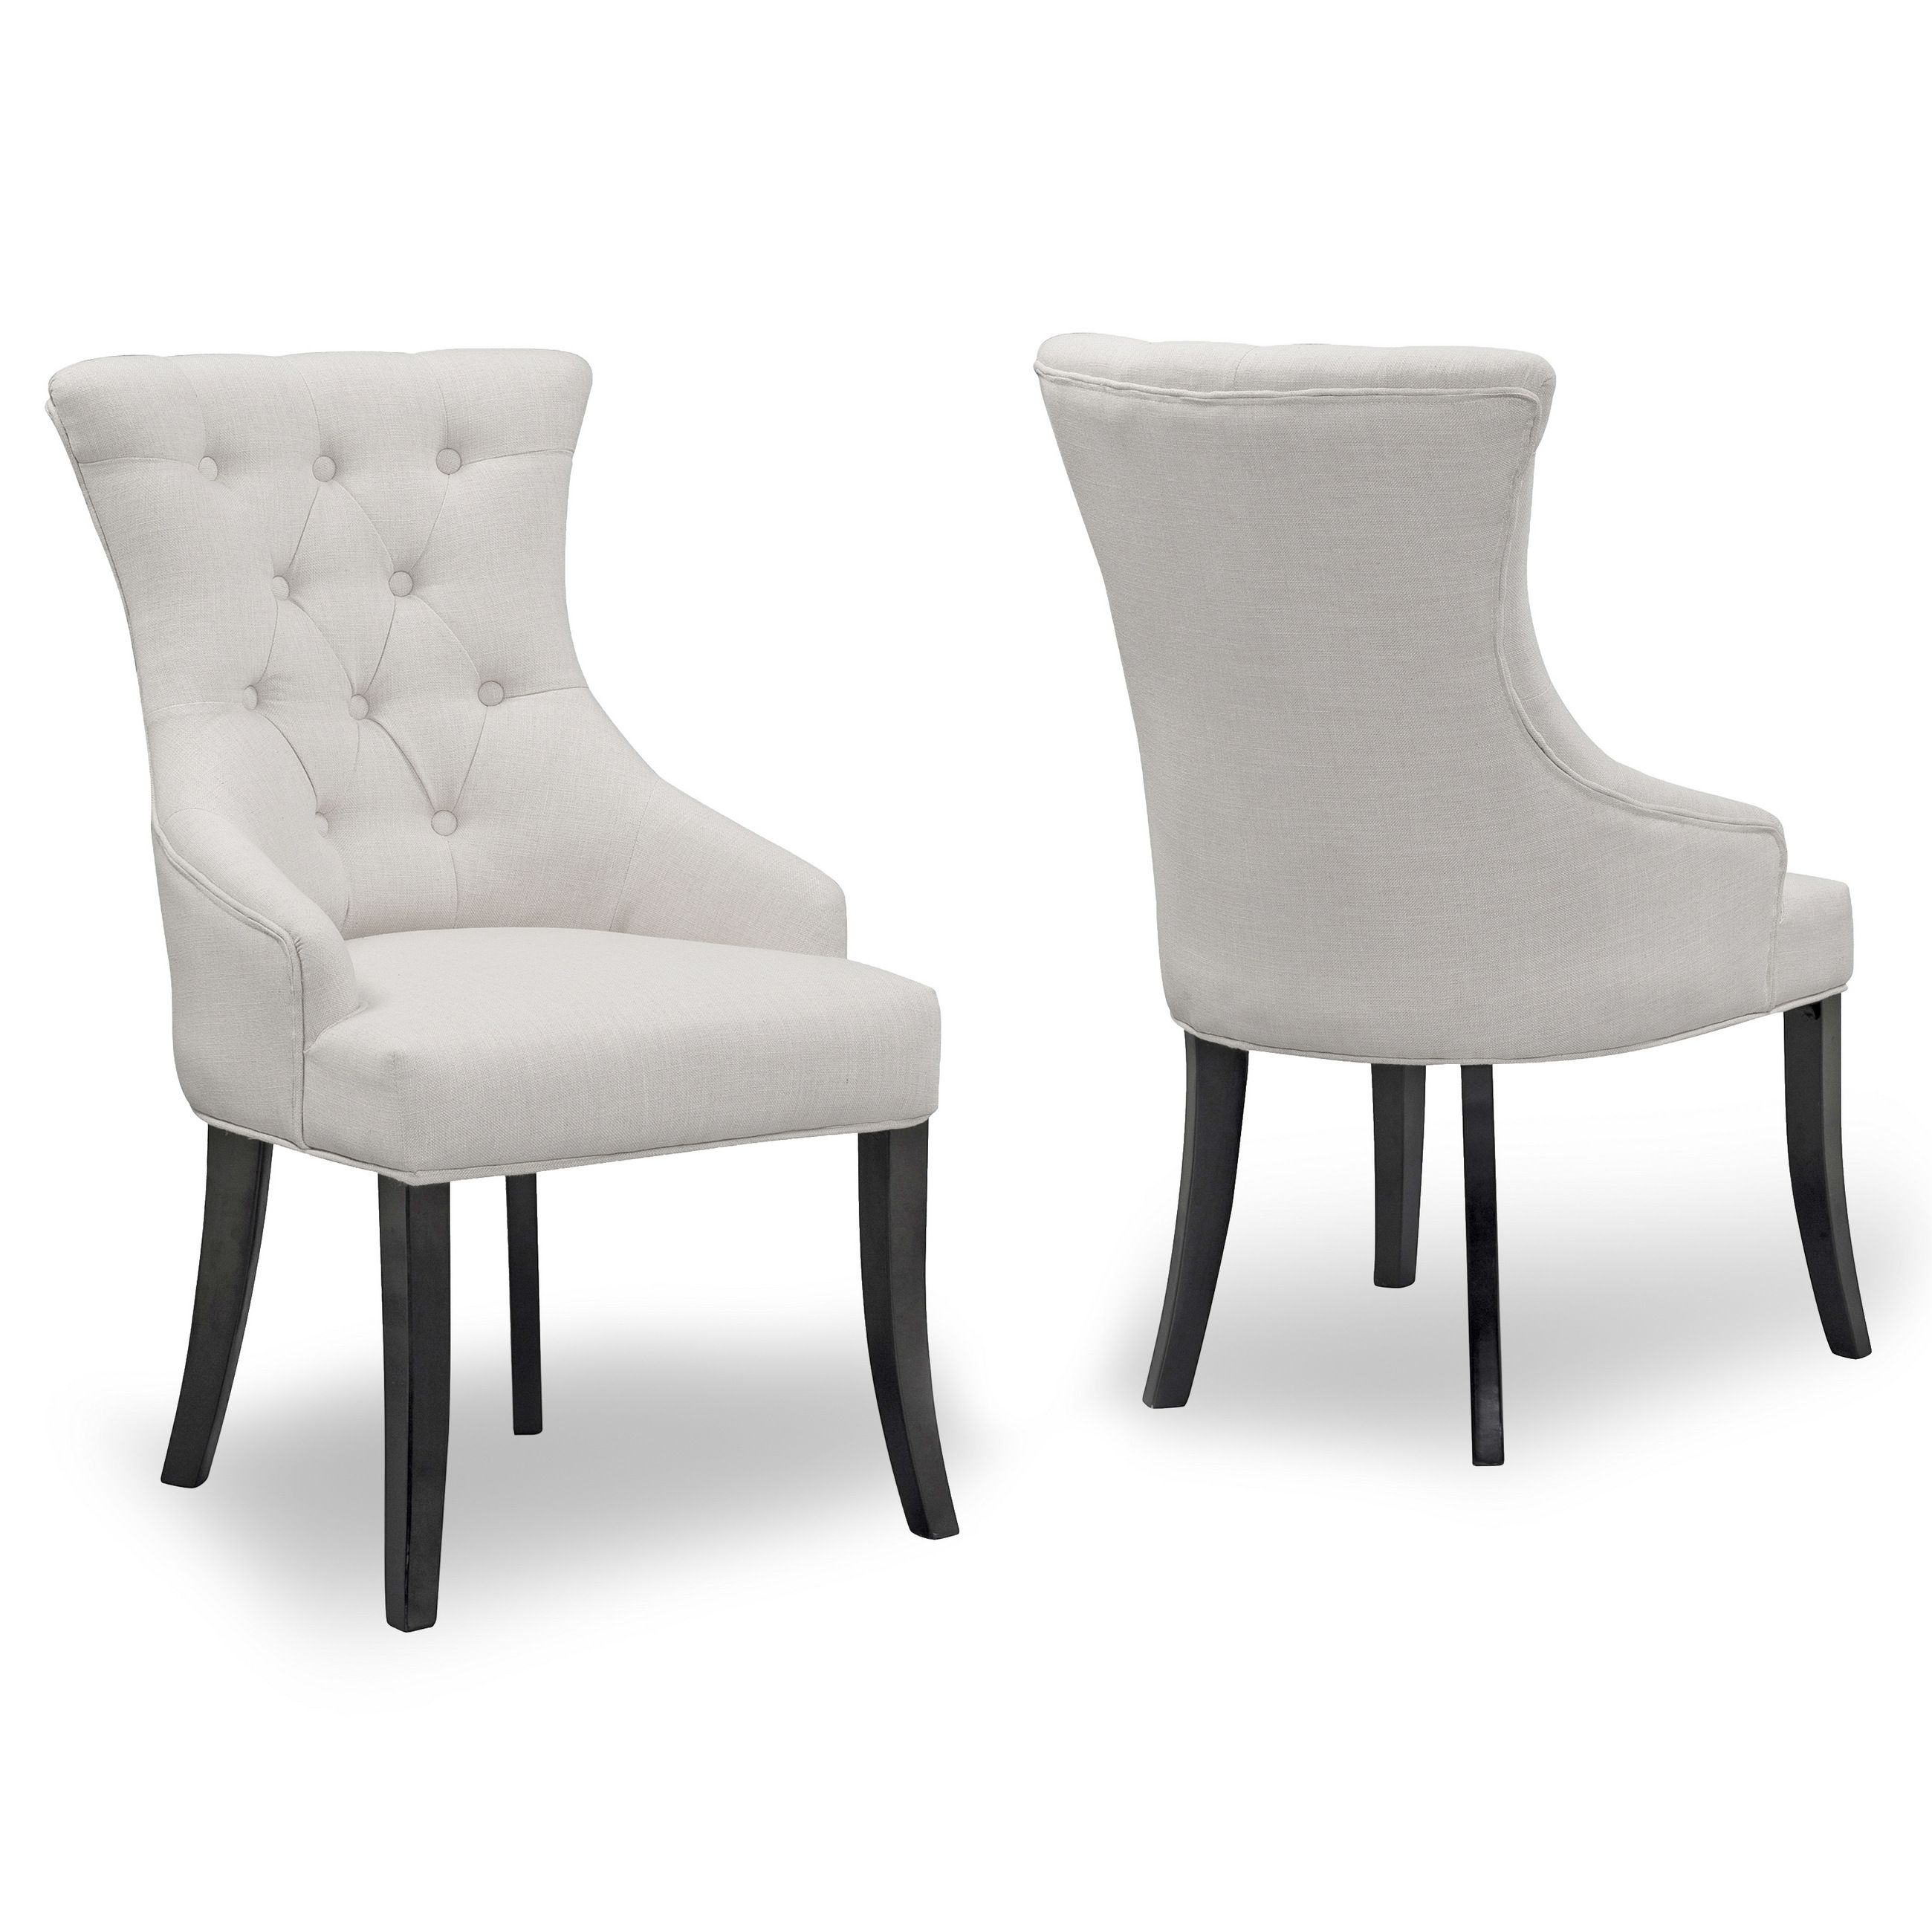 Set of 2 Alei Beige Fabric Dining Chair Wing Chair with Tufted Buttons - Walmart.com | Walmart (US)